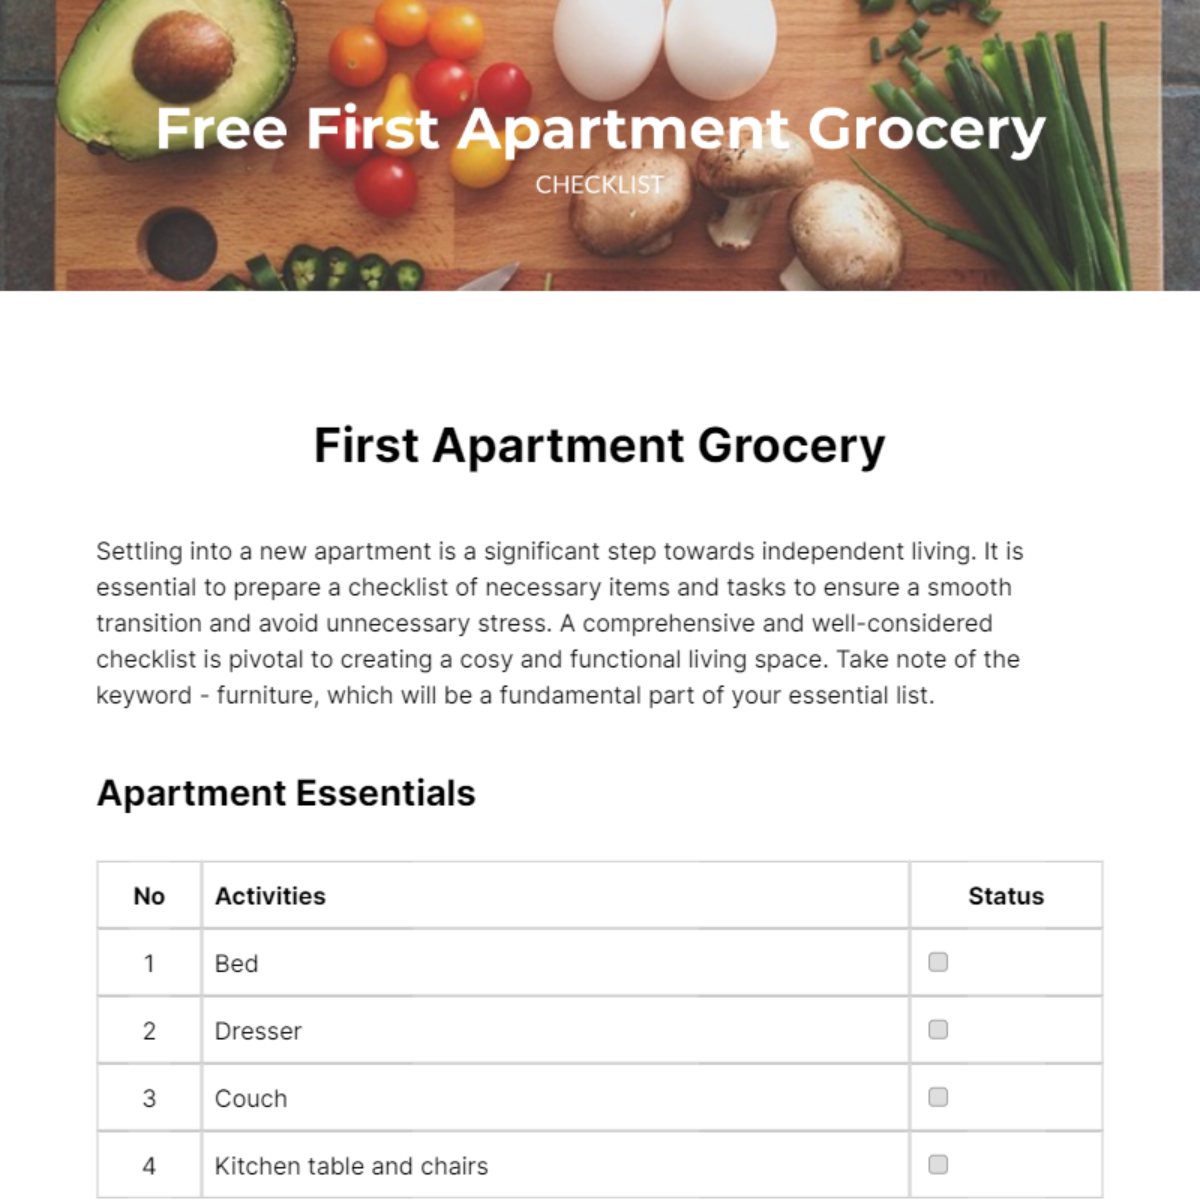 A Basic First Apartment Grocery List (Downloadable